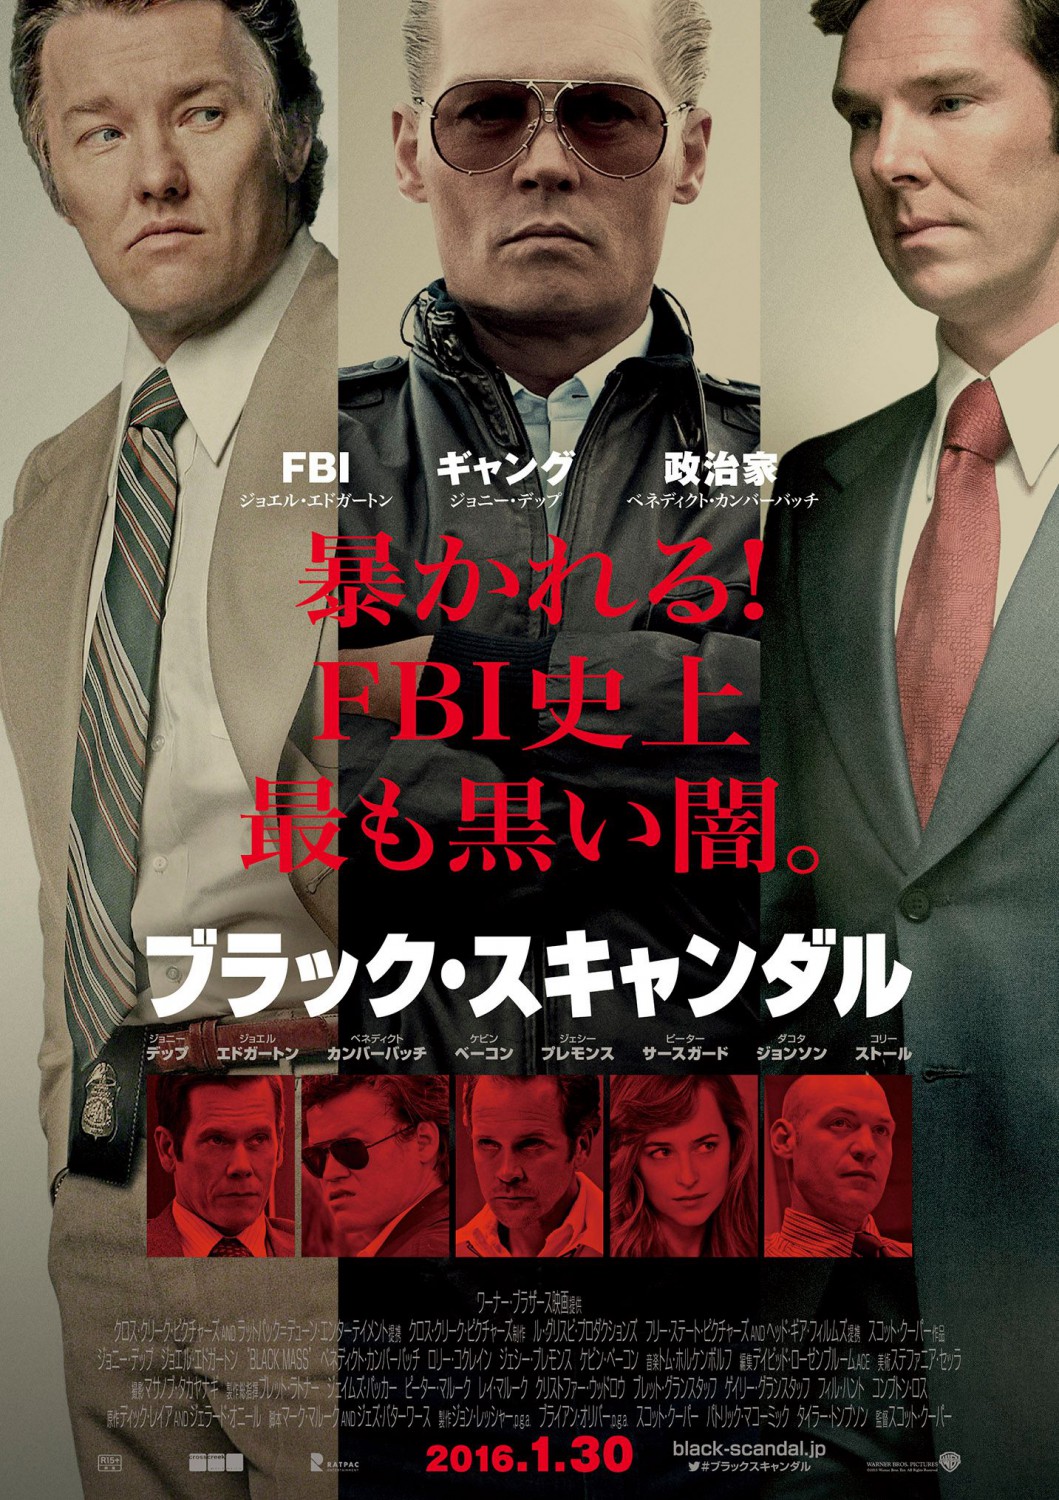 Extra Large Movie Poster Image for Black Mass (#13 of 13)